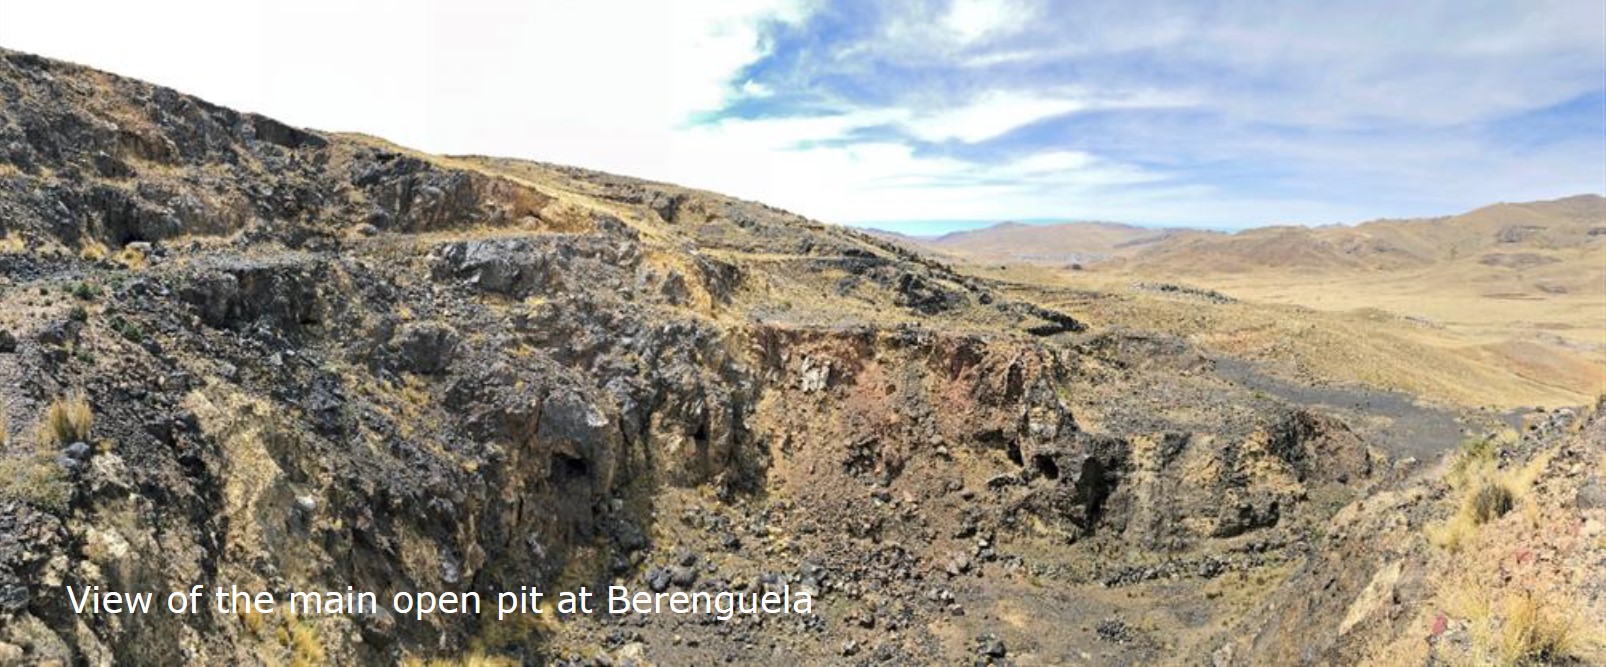 View of main open pit at Berenguela.